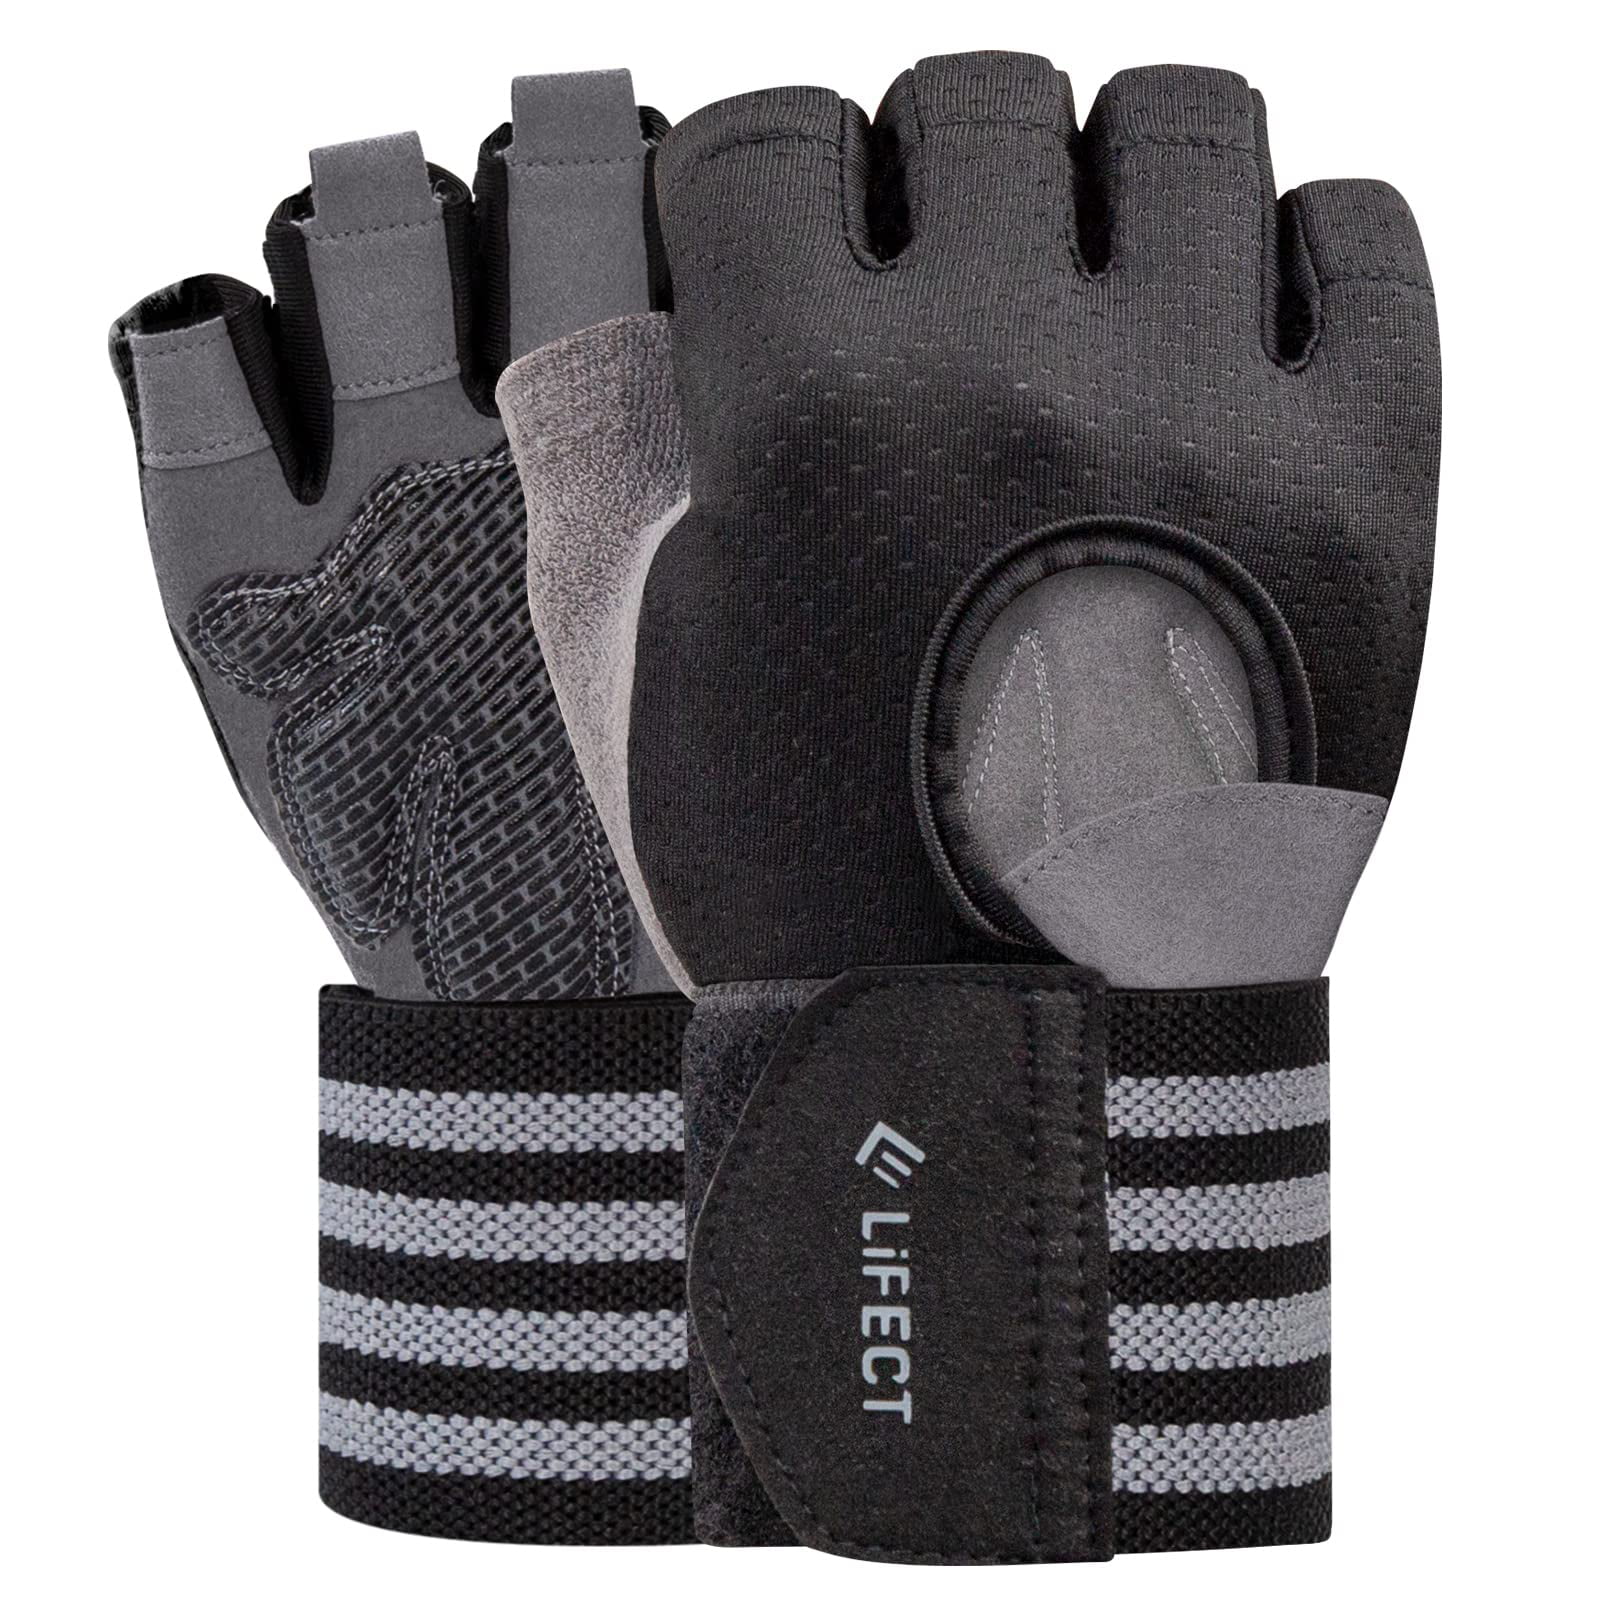 GG-2 Gym Gloves Workout Training Exercise Body Building Grips Finger Tabs 